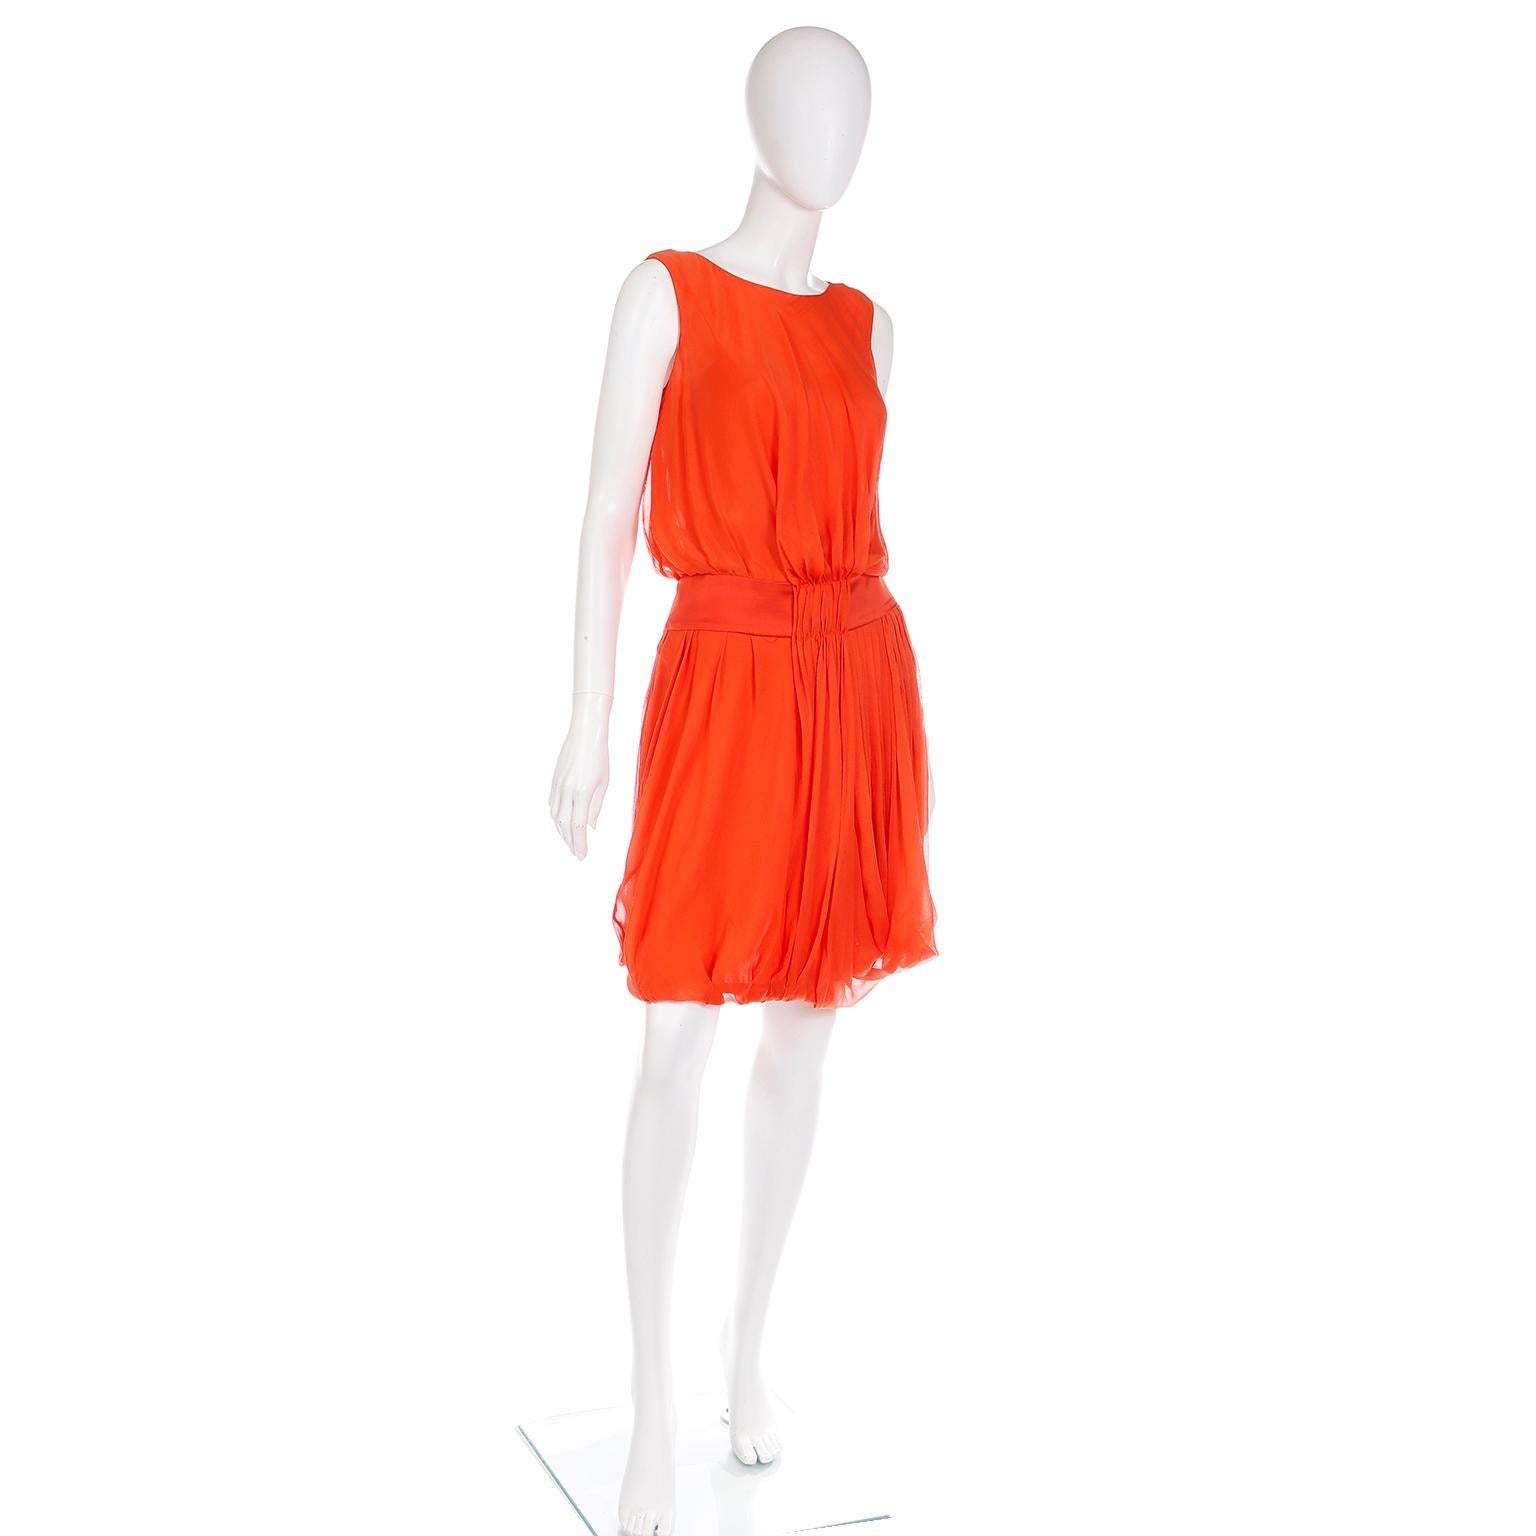 Vintage Fine Silk Chiffon Orange Sleeveless Dress With Satin Waistband In Excellent Condition For Sale In Portland, OR